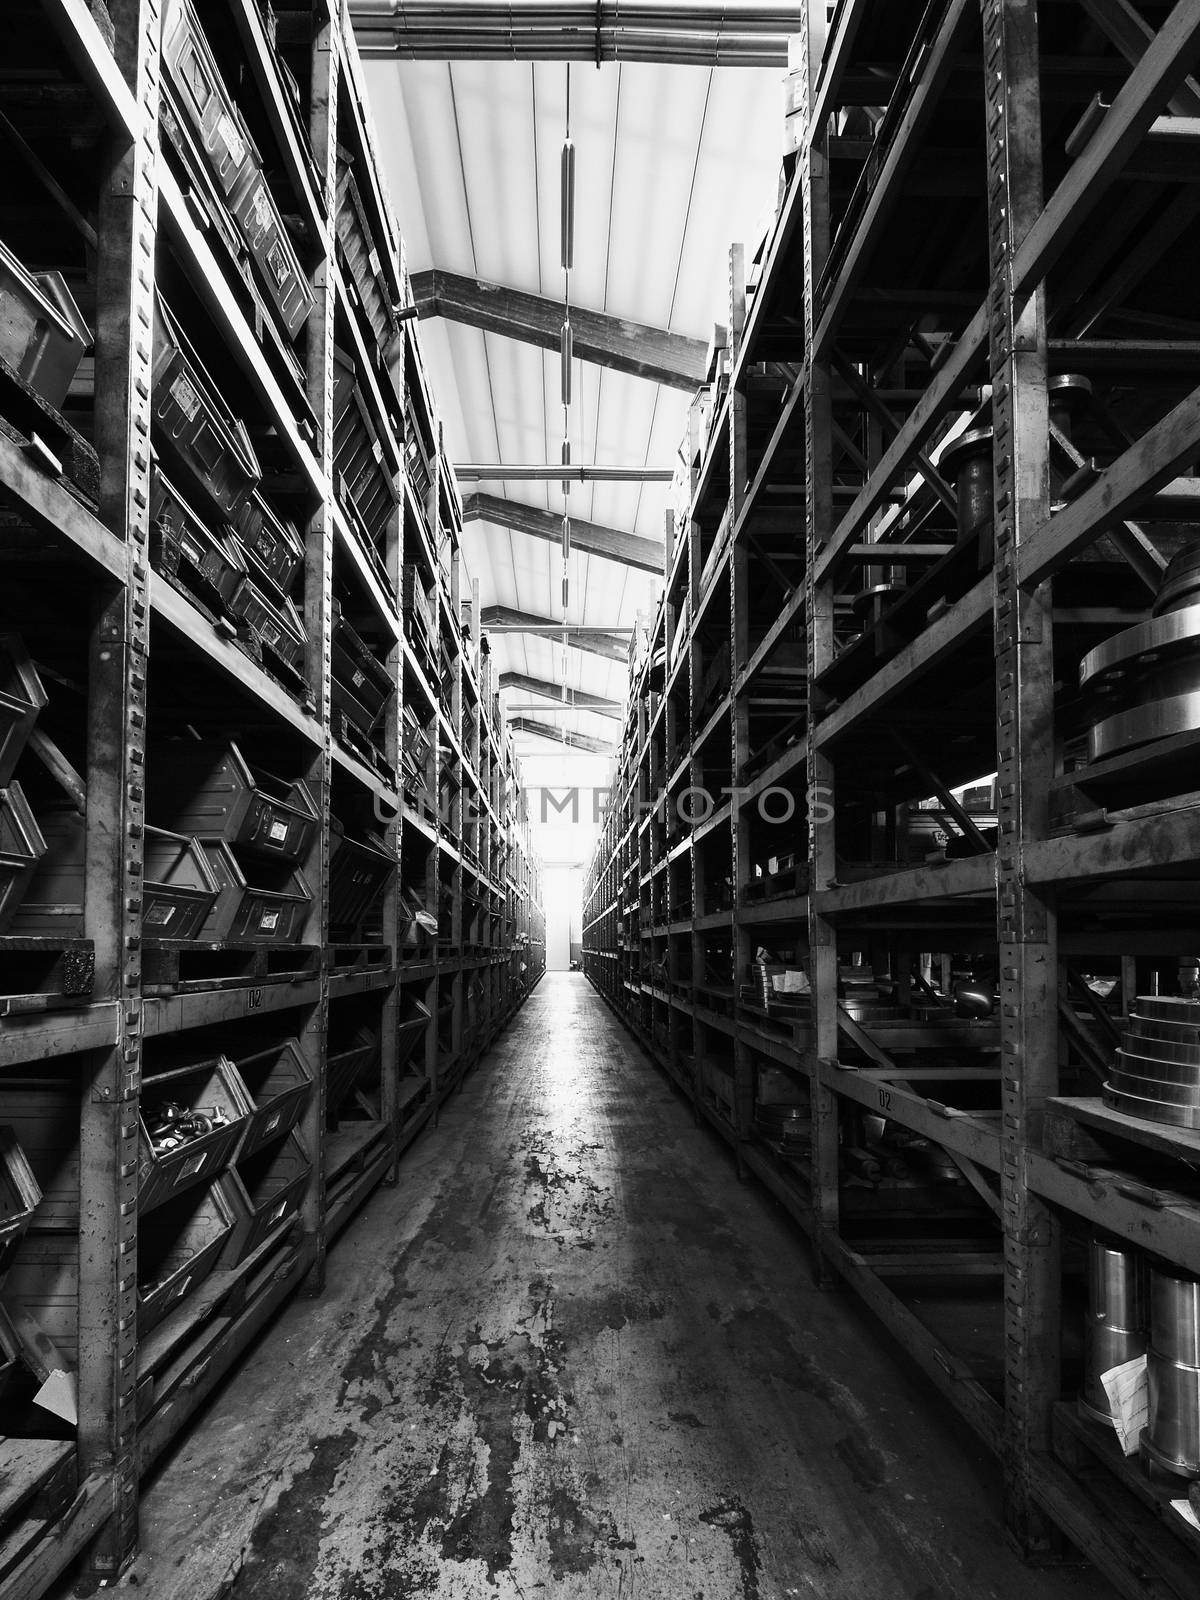 Black and White image of warehouse shelves with tools